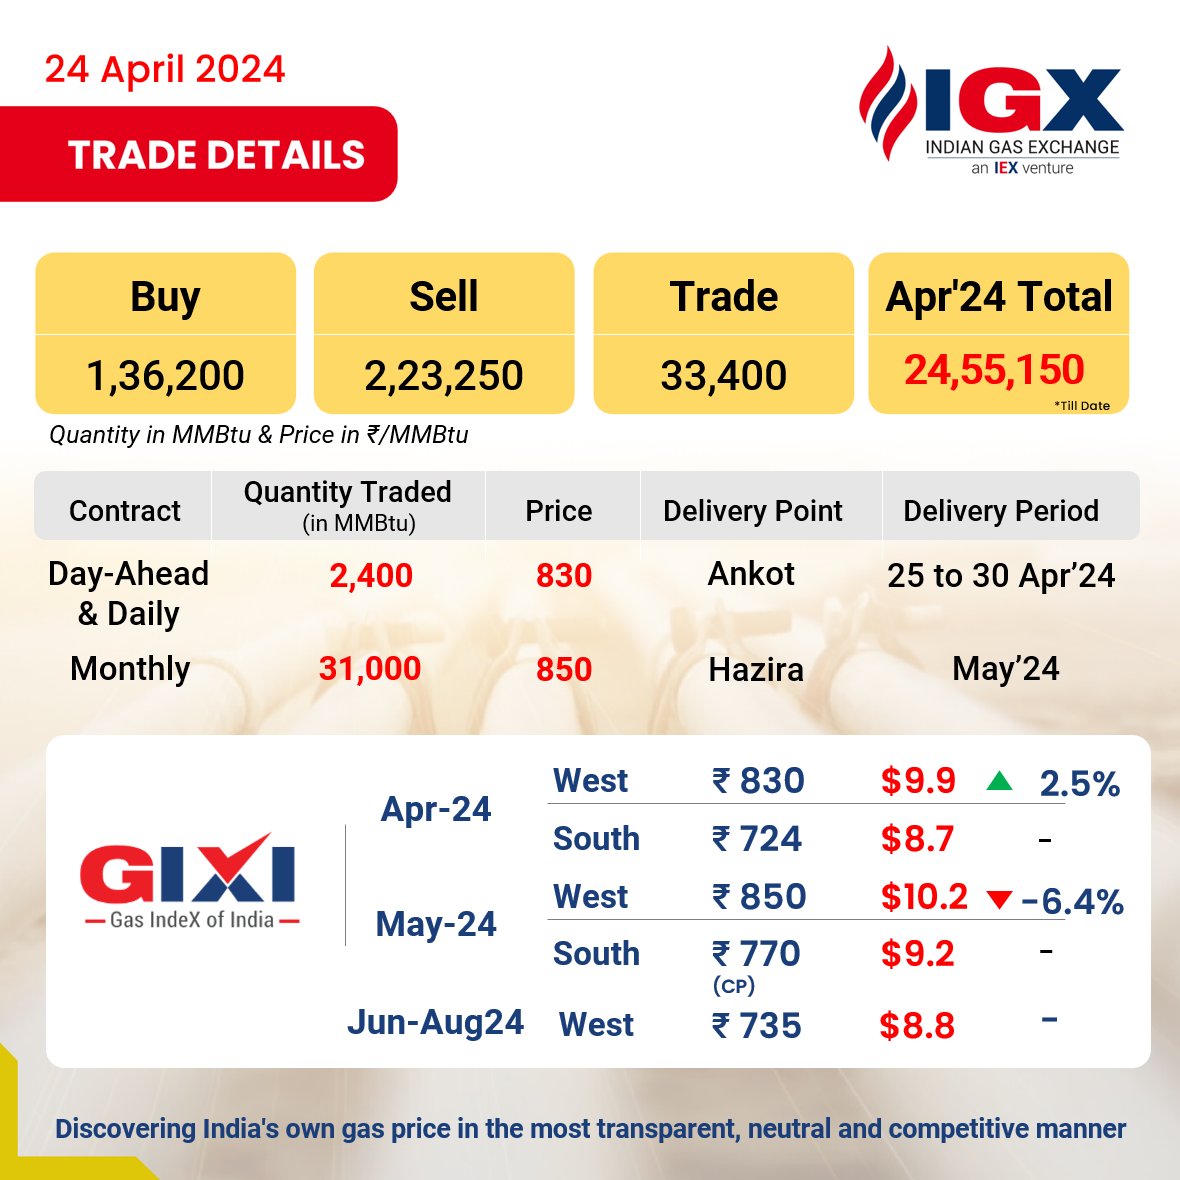 IGX trades 33,400 MMBTu quantity at multiple delivery points, with delivery scheduled from 25 Apr'24 - 31 May'24.  #IGXIndia #GasMarkets #LNG #IGX